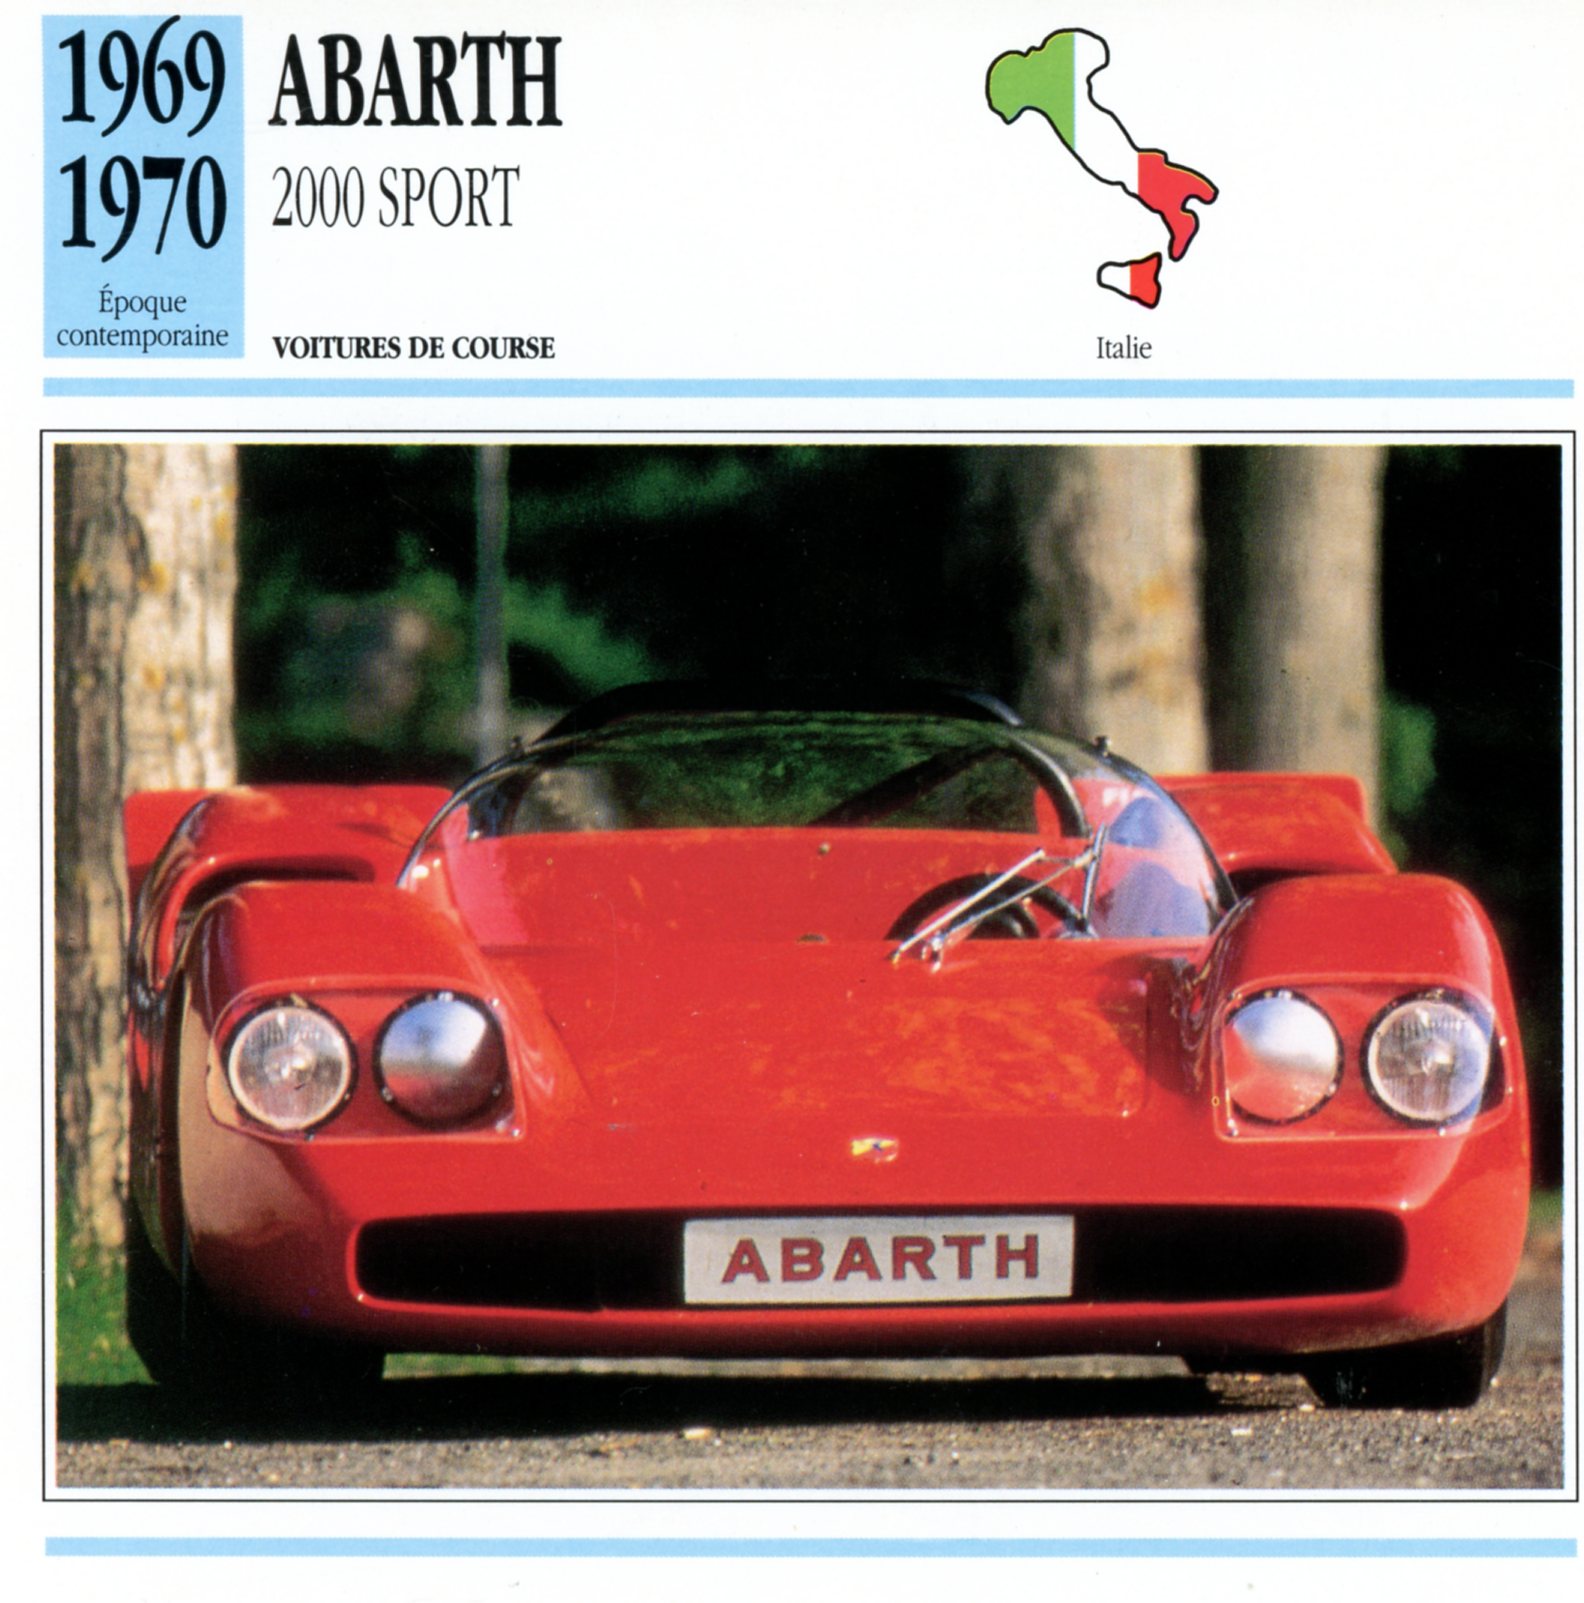 FICHE-AUTO-ABARTH-2000-SPORT-LEMASTERBROCKERS-CARS-CARD-1969-1970